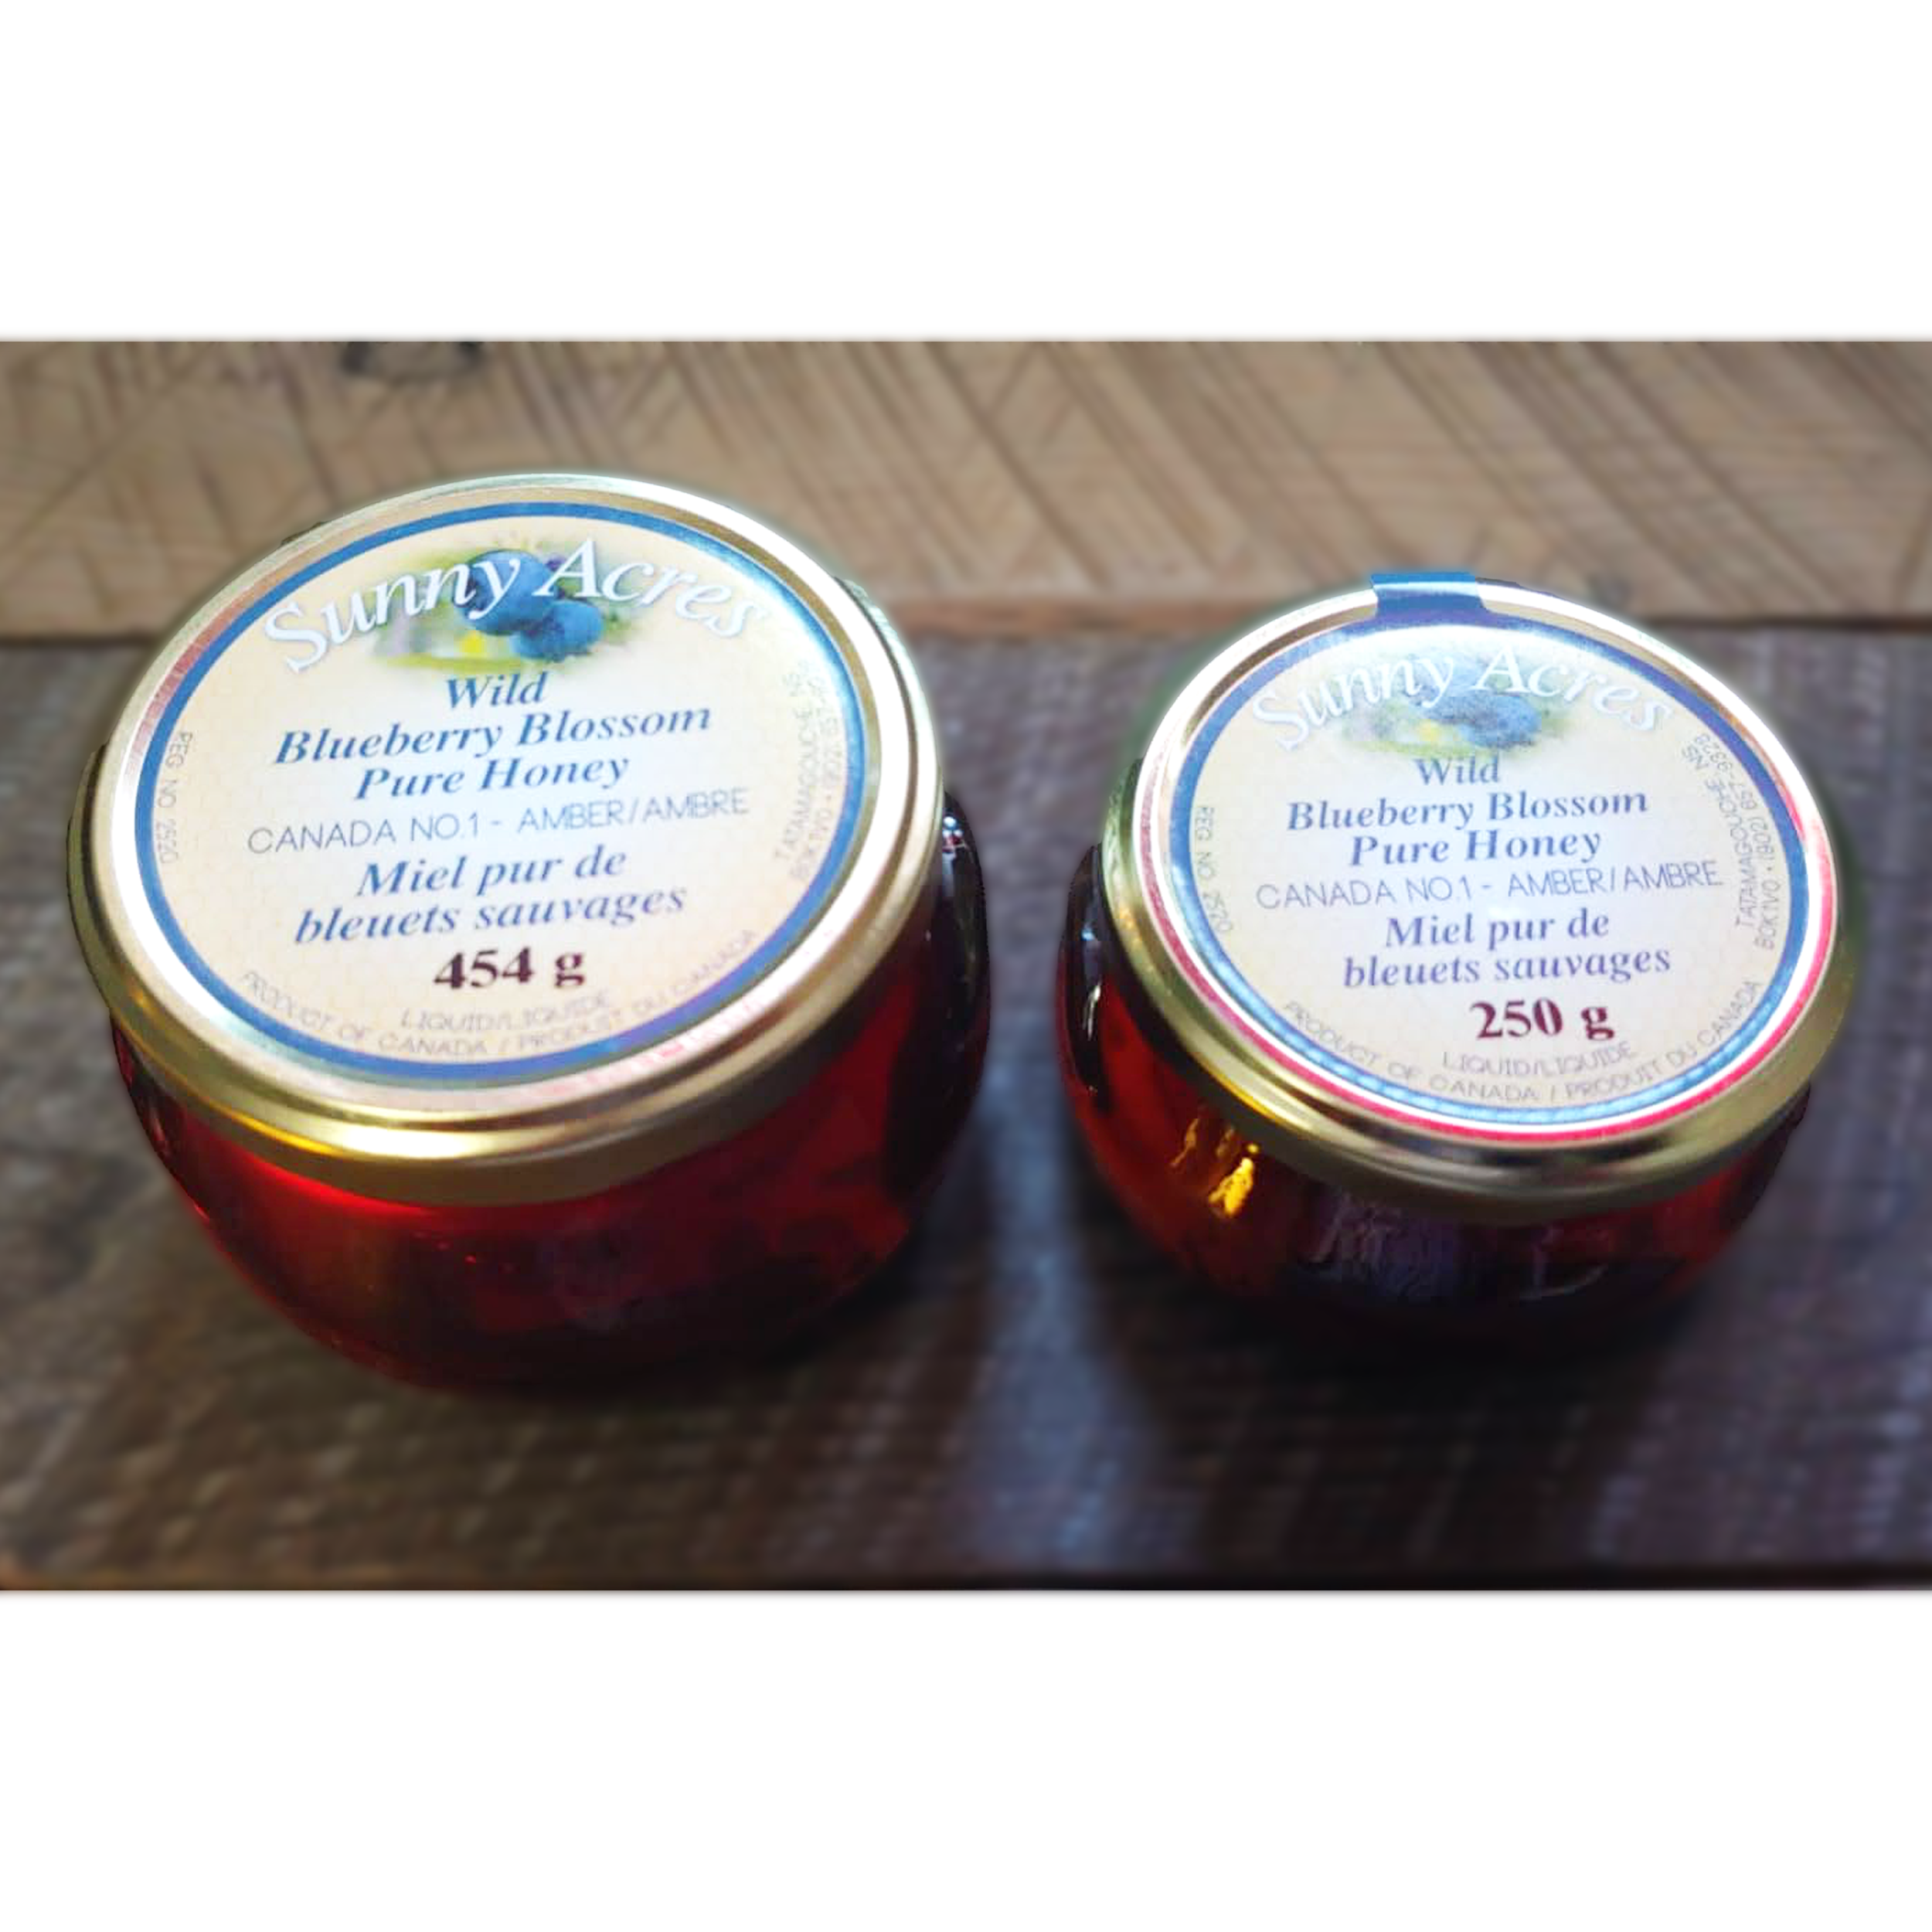 large and small blueberry blossom honey jars